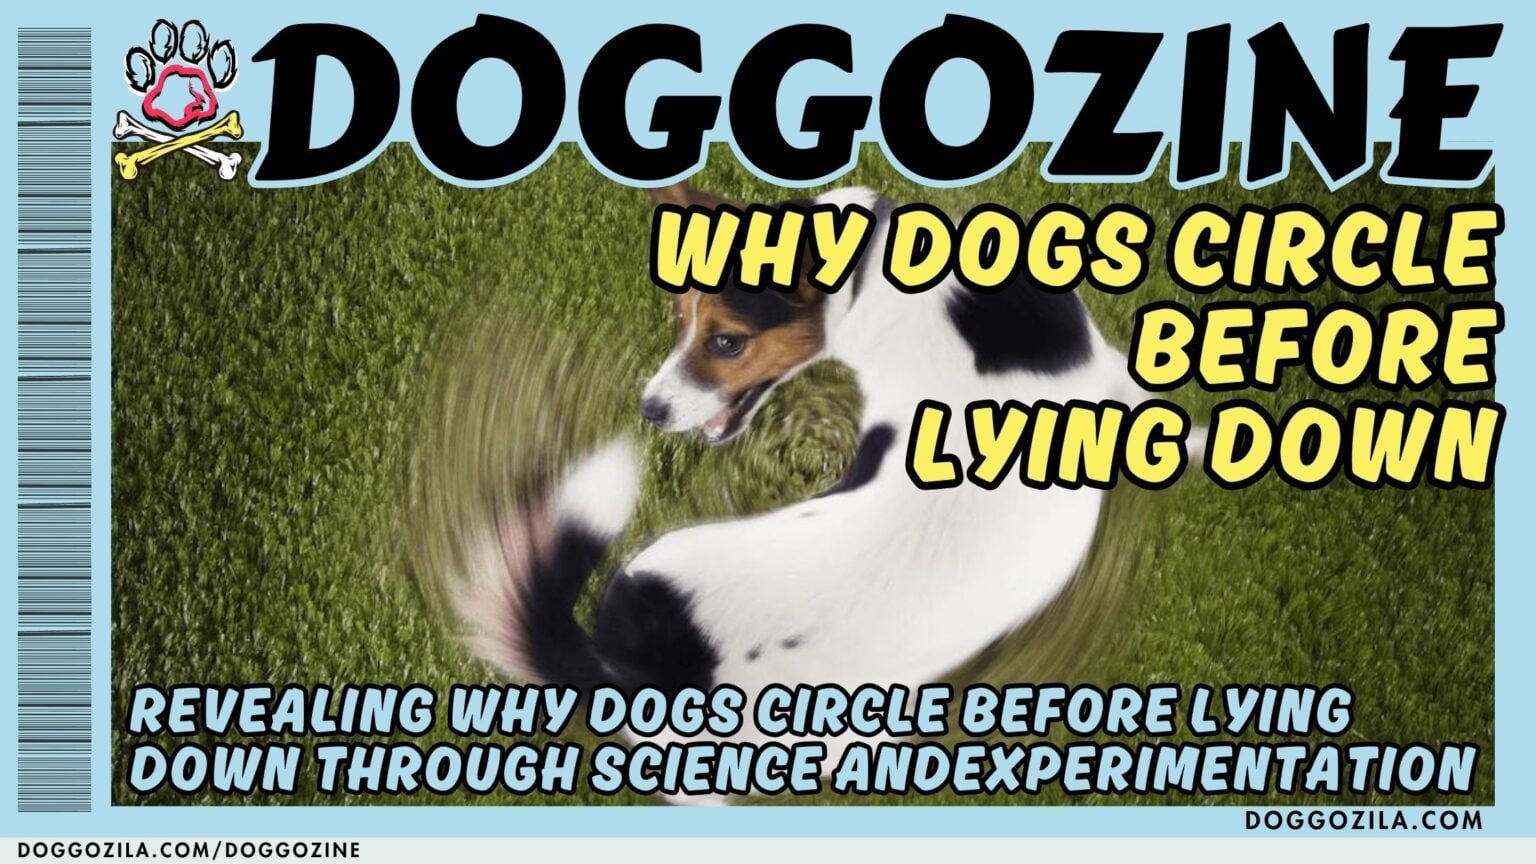 WHY DO DOGS CIRCLE BEFORE LYING DOWN